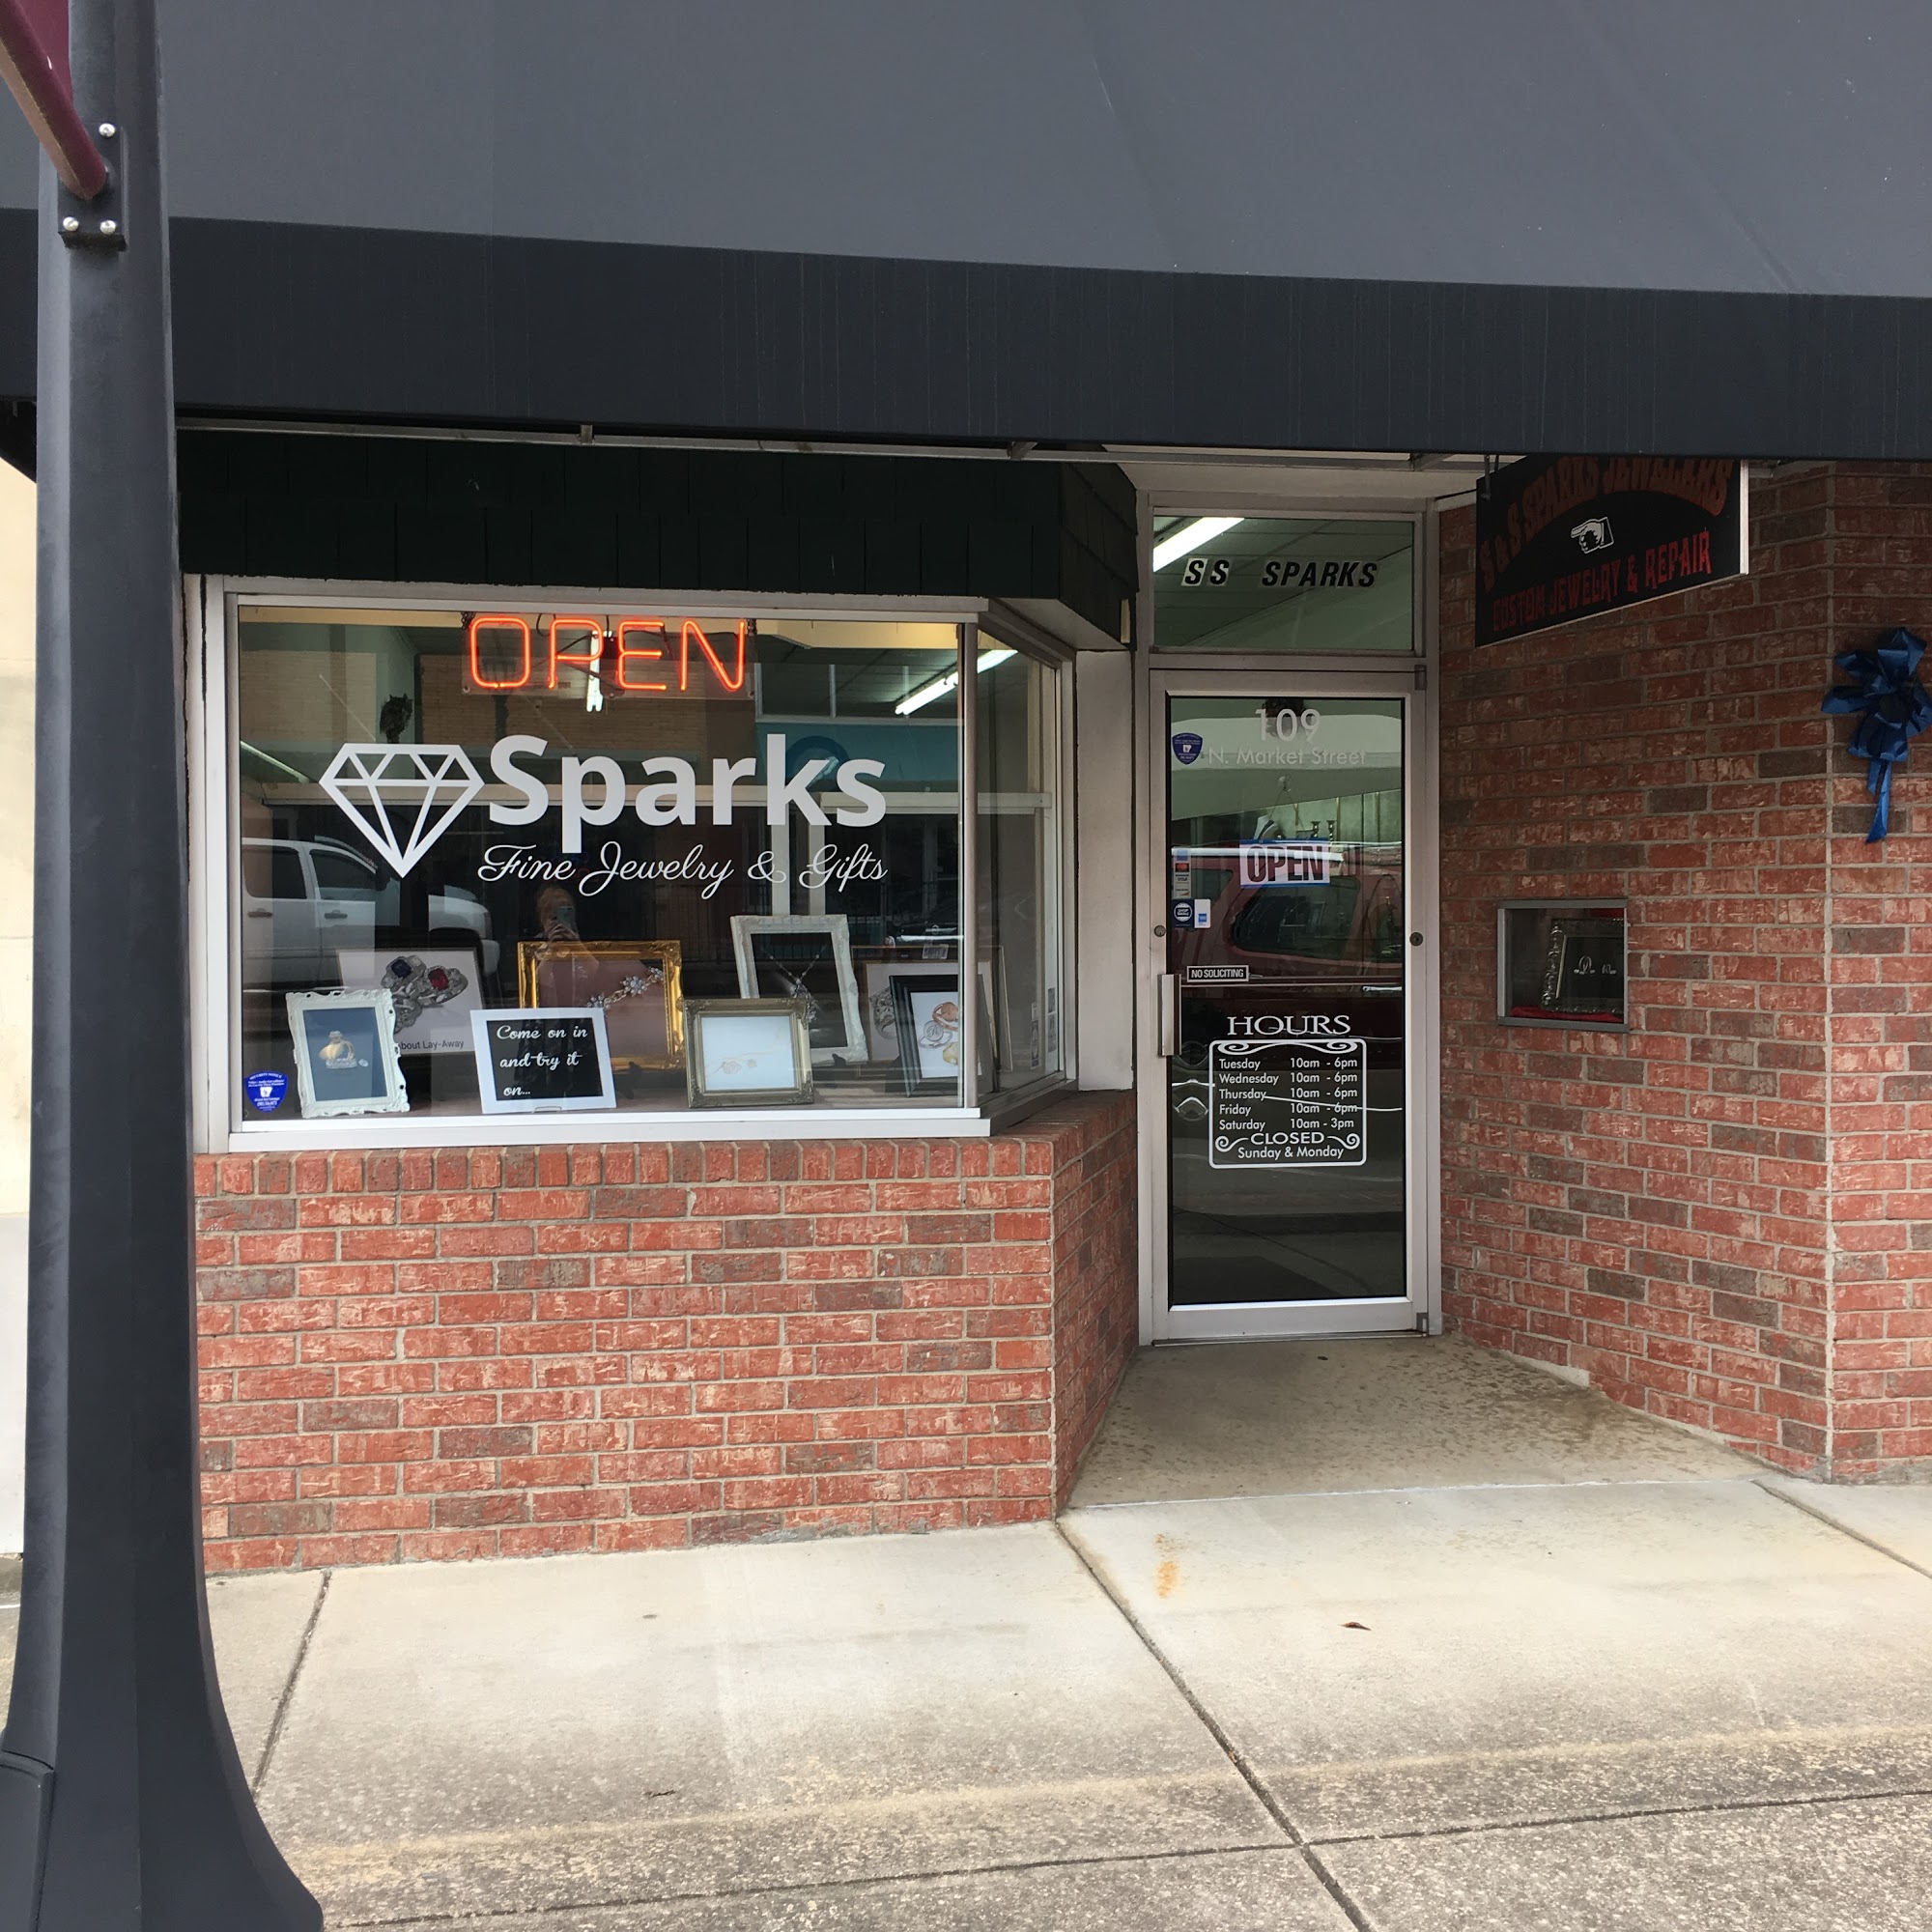 Sparks Fine Jewelry & Gifts